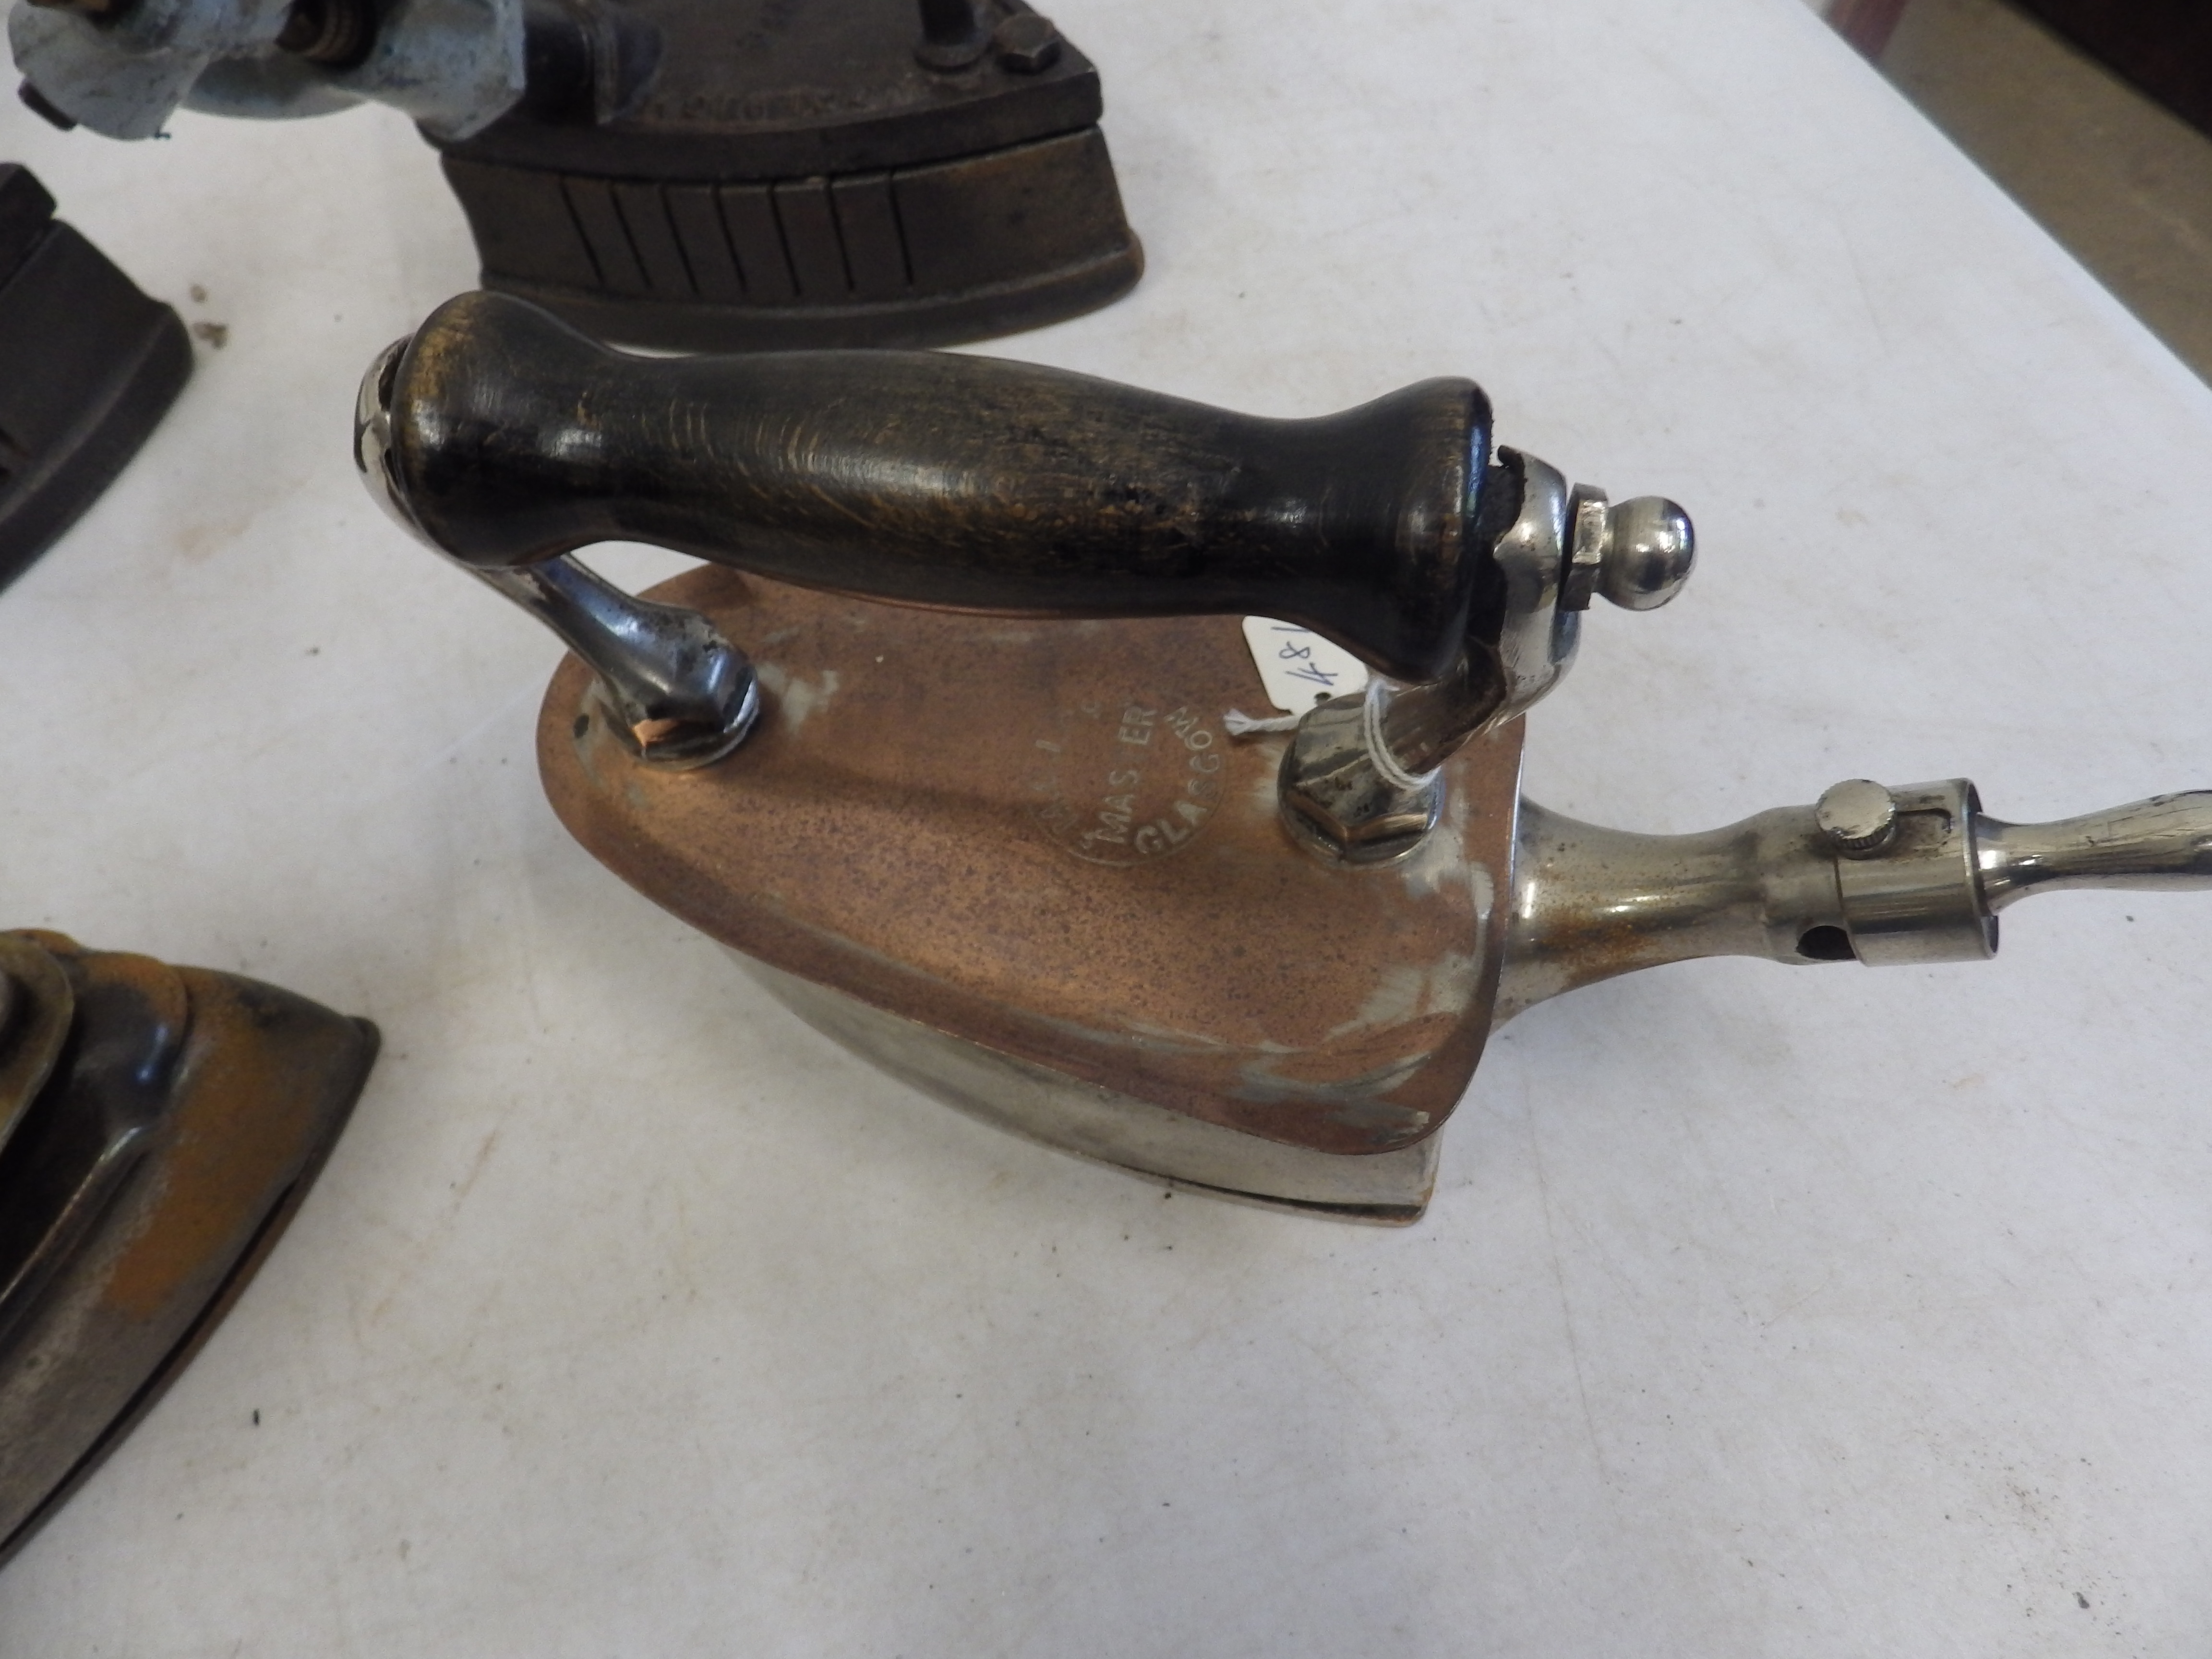 2 M G I Co Glasgow Master gas irons with copper/brass heat shields together with 2 Lister Bros No. - Image 5 of 6